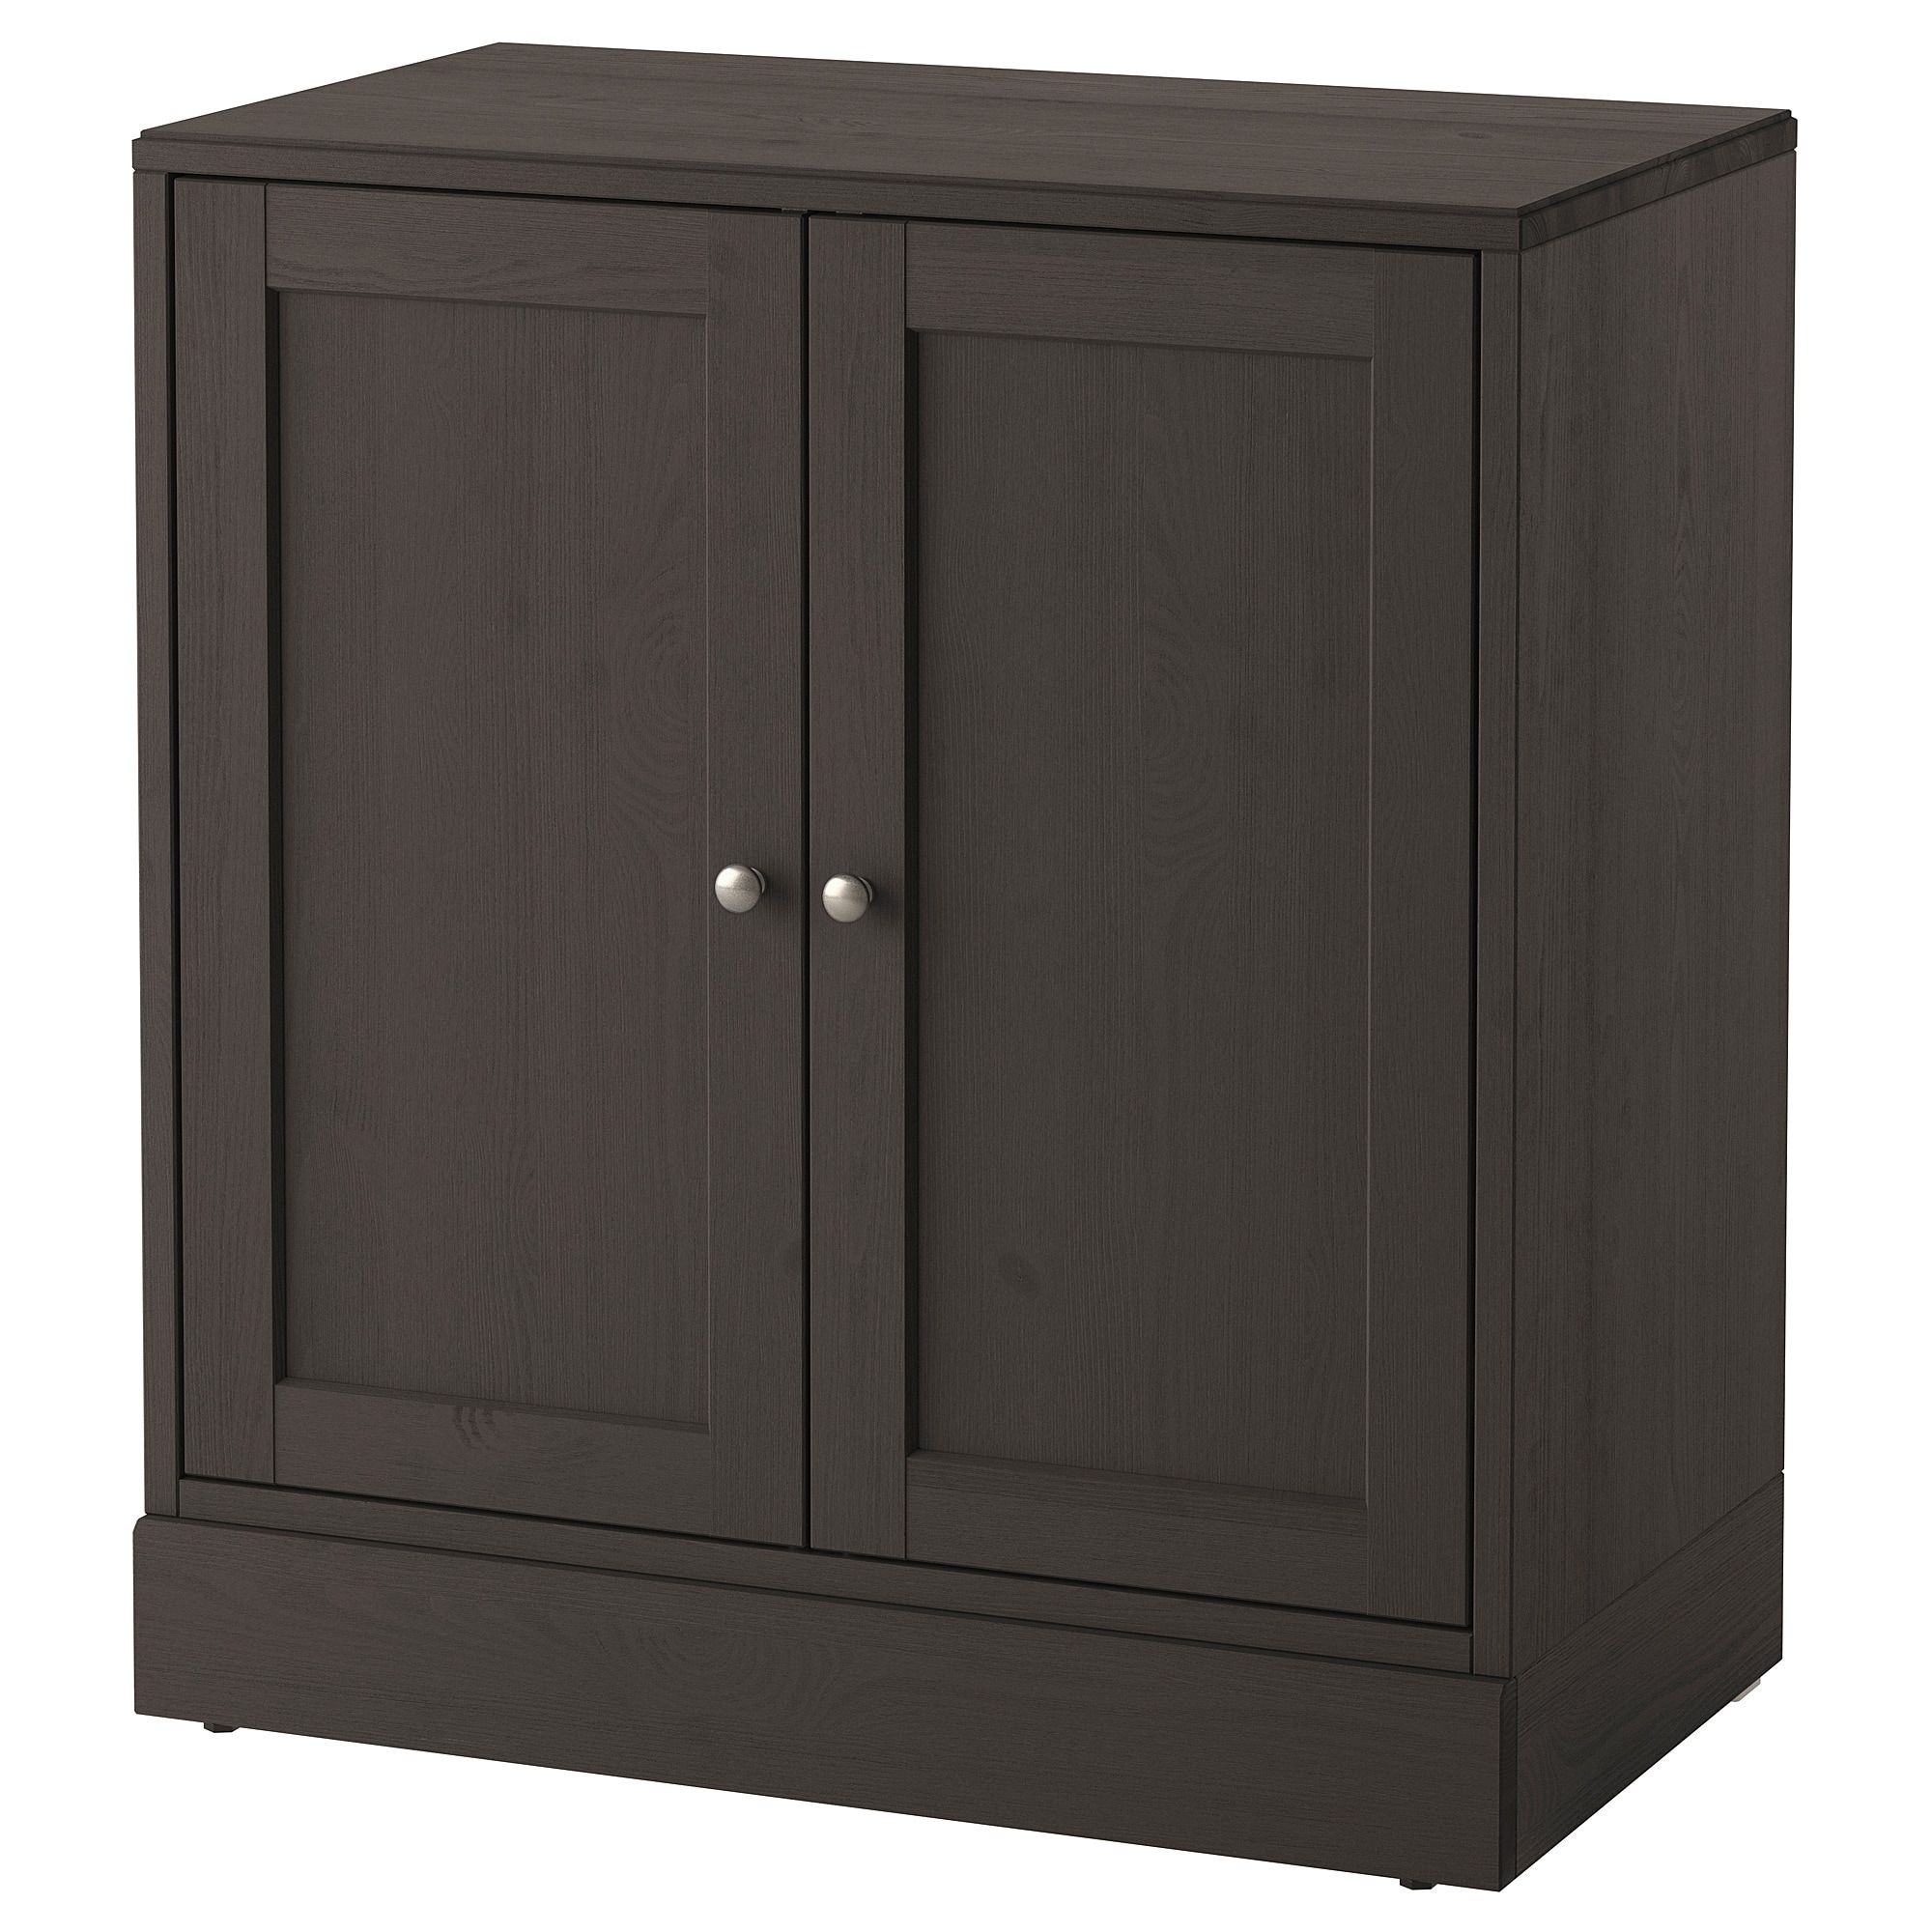 Storage Cabinets & Storage Cupboards | Ikea Ireland Throughout Mid Burnt Oak 71 Inch Sideboards (View 7 of 30)